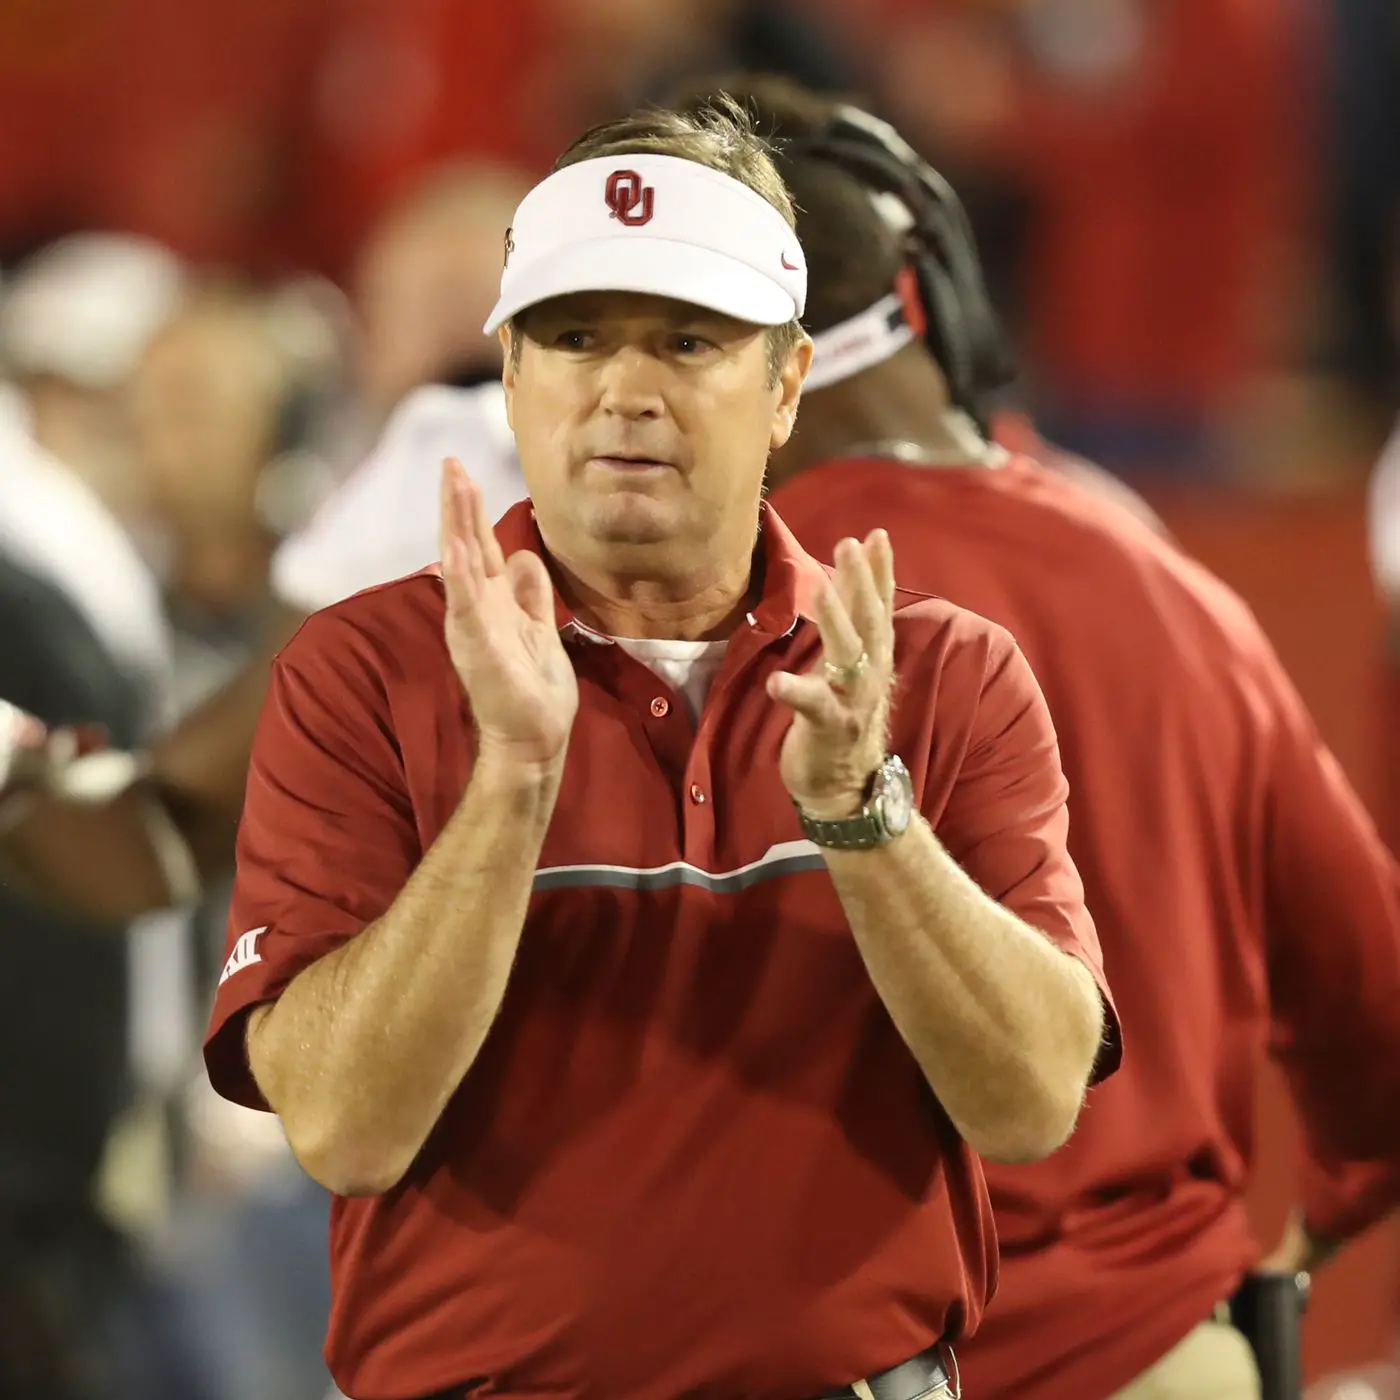 Bob Stoops Bio, Wiki, Age, Wife, Kids, Parents, Brother, Salary, Net